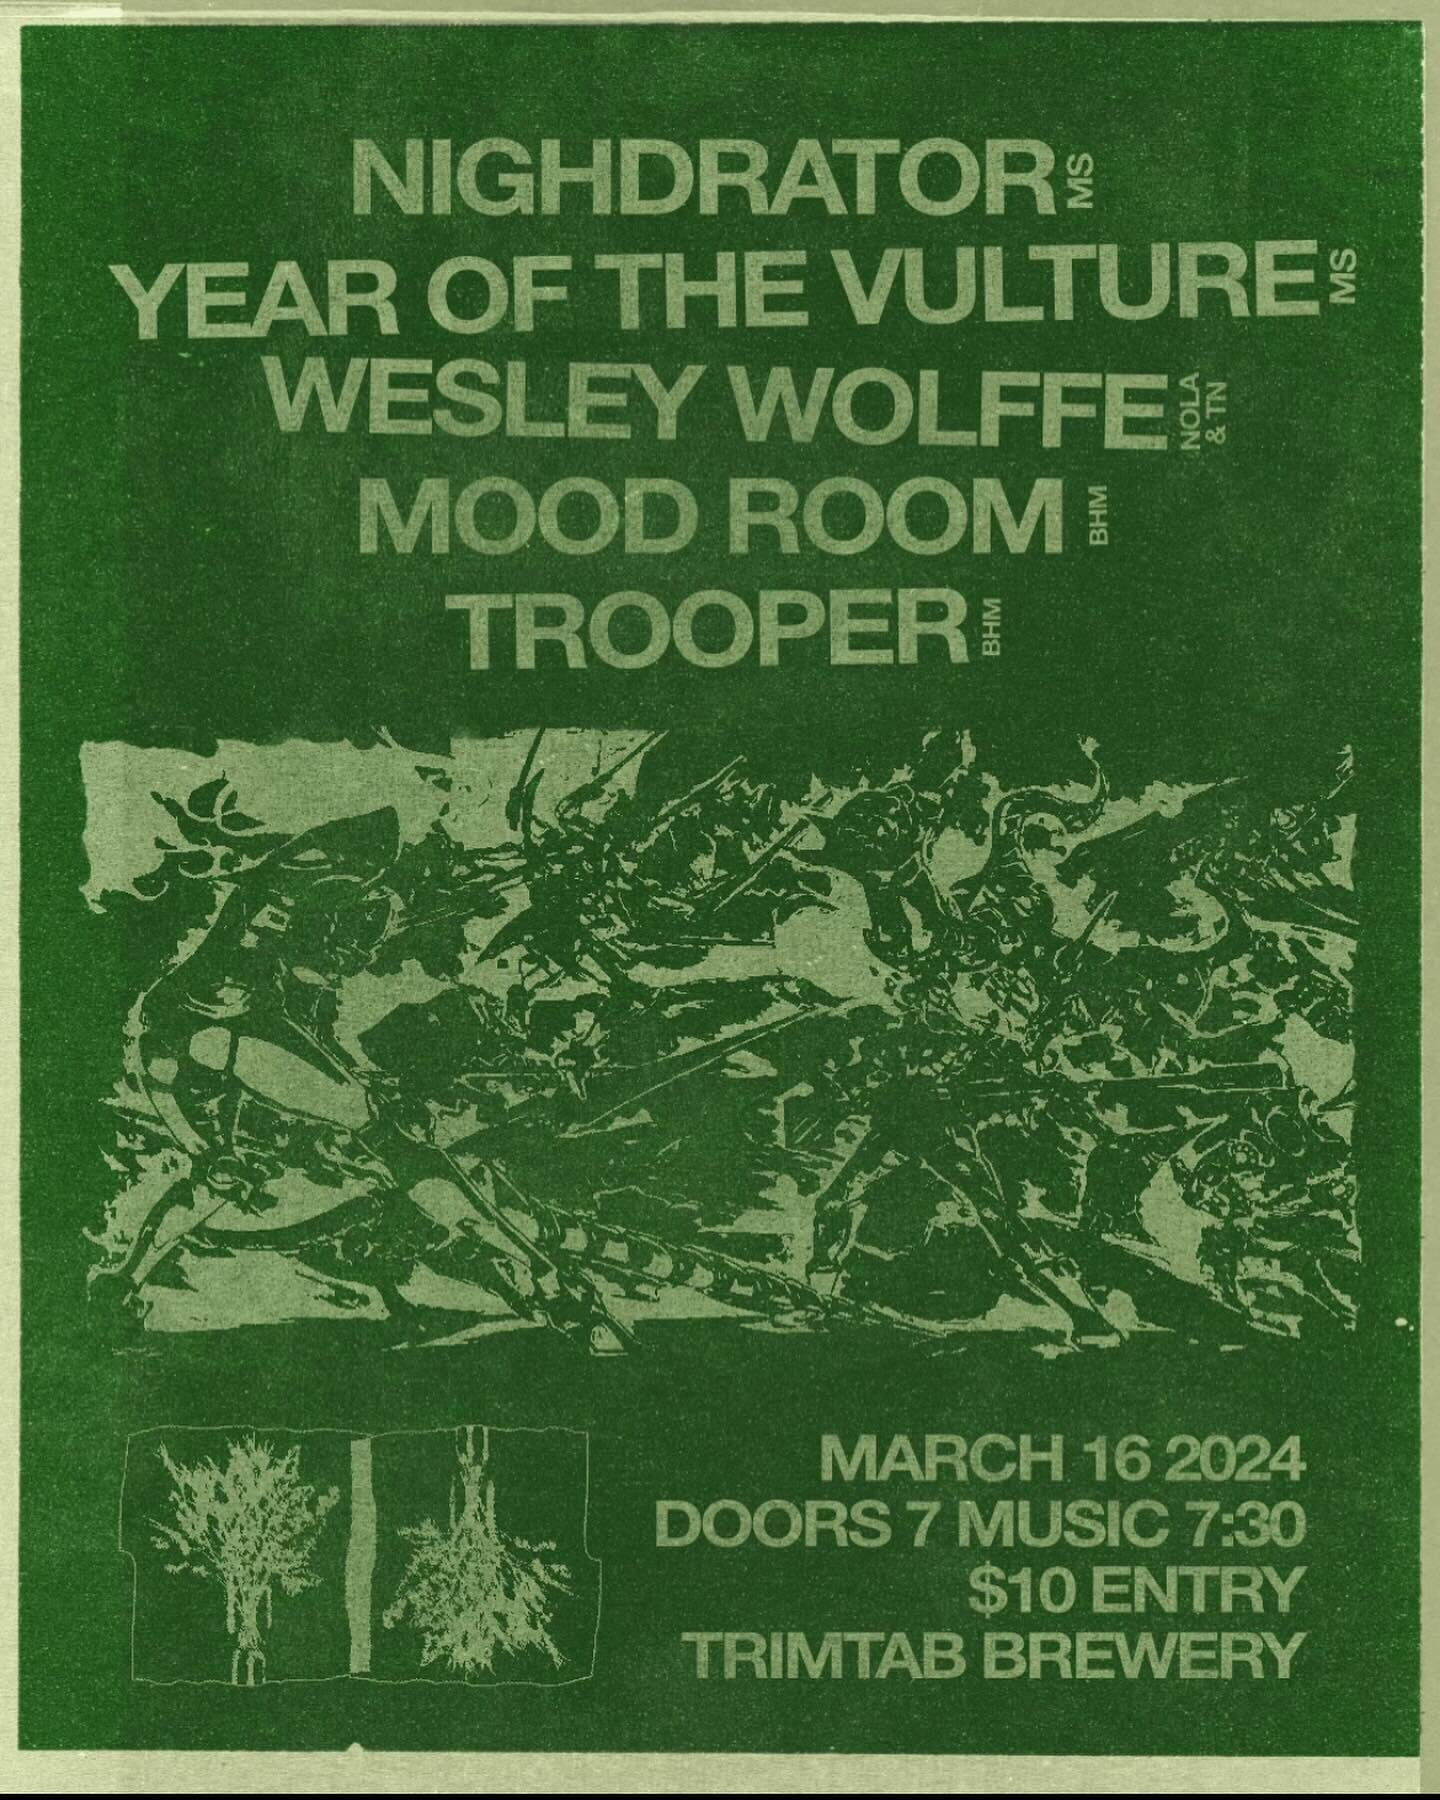 Hattiesburg&rsquo;s own @nighdrator and @yearofthevulture will be rolling through March 16th!!!!!!! 
Also joining this ultimate chill vibe event is @vesleyvolffe , @trooperswrld , and @moodroomies